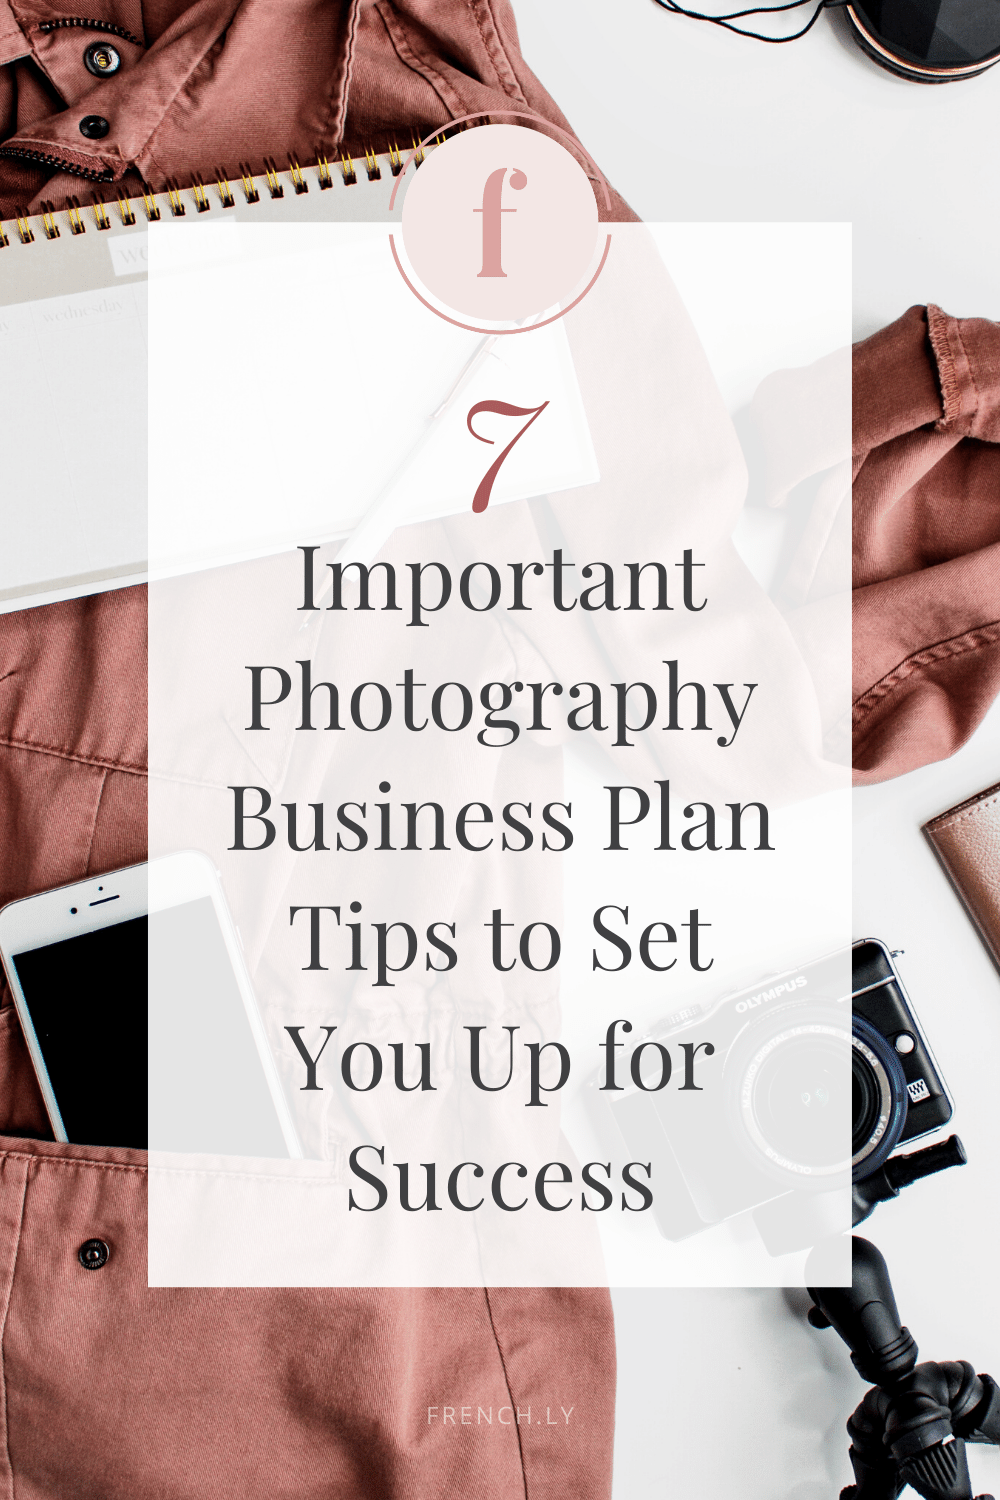 7 Important Photography Business Plan Tips to Set You Up for Success | Frenchly Food + Product Photography